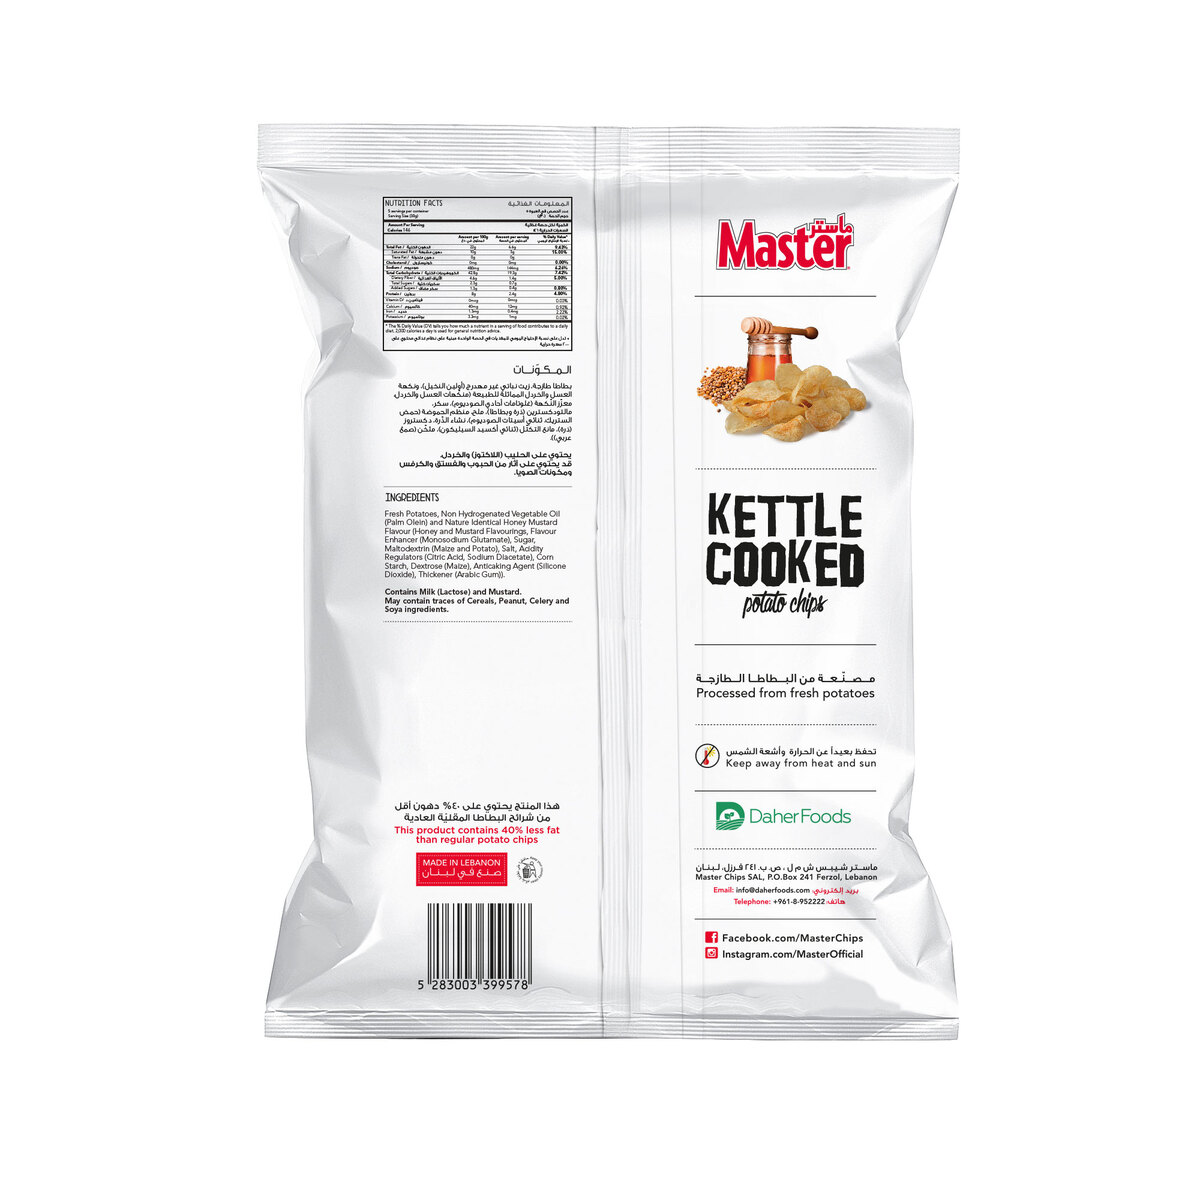 Master Kettle Cooked Potato Chips with Honey Mustard Flavour 170 g